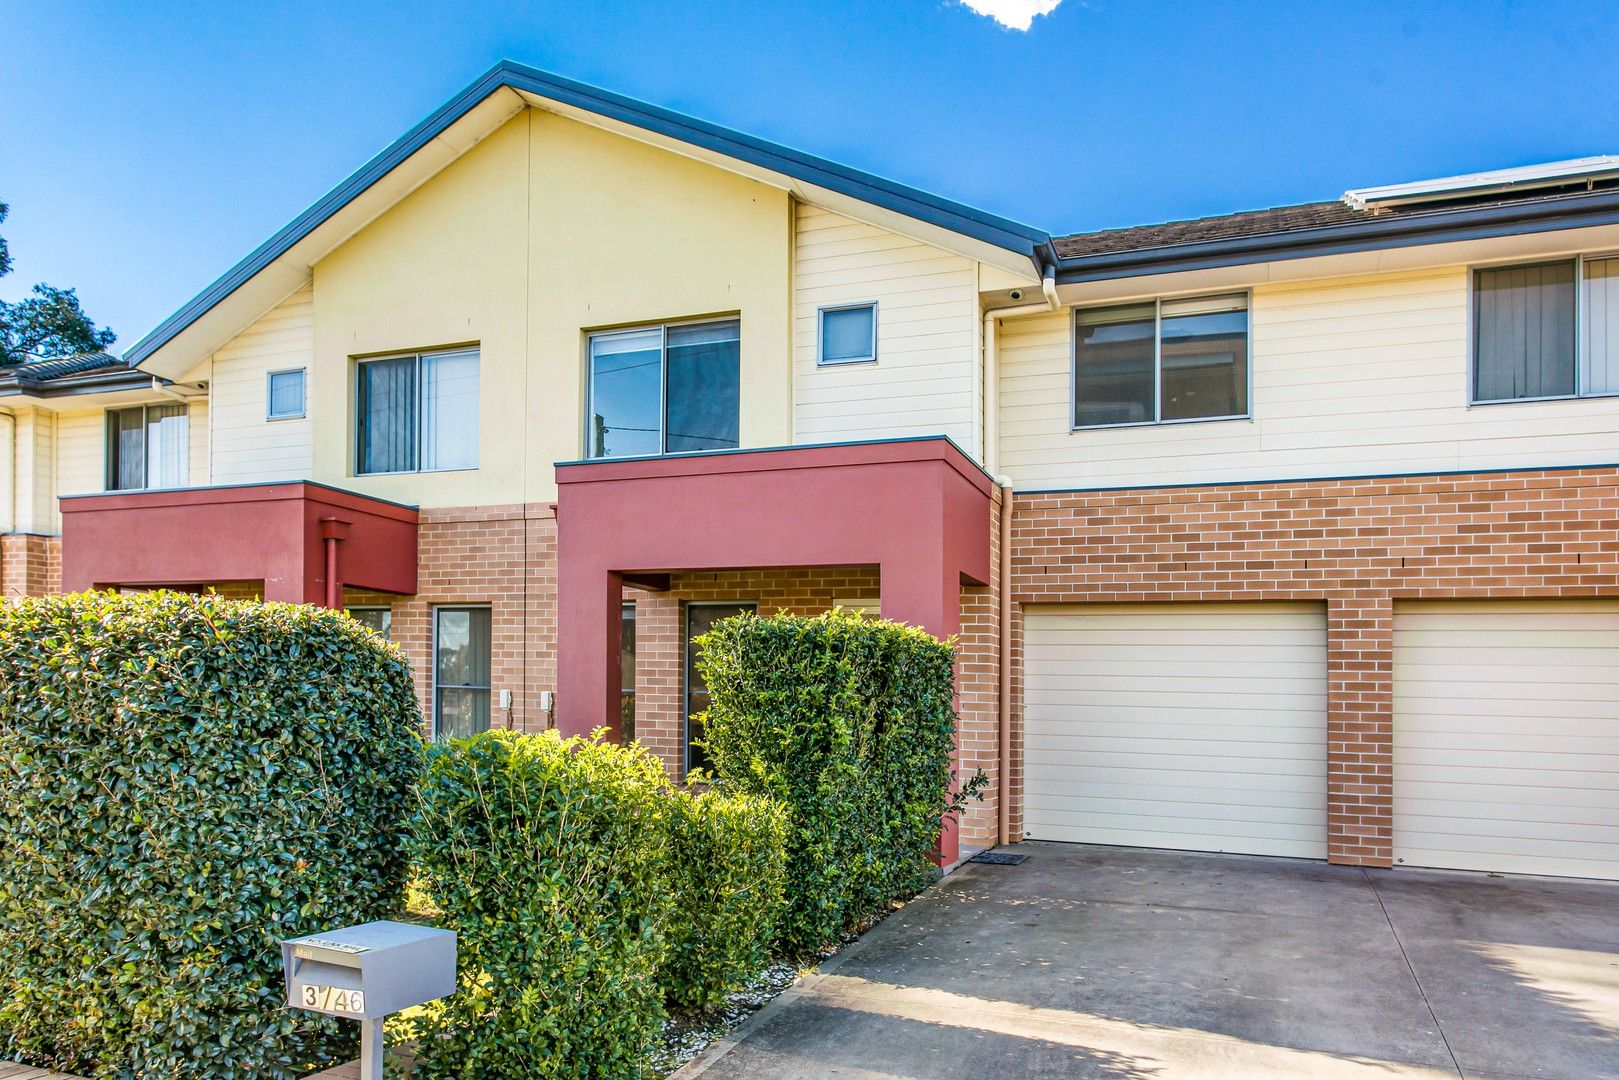 3/46 Pearce Road, Quakers Hill NSW 2763, Image 1